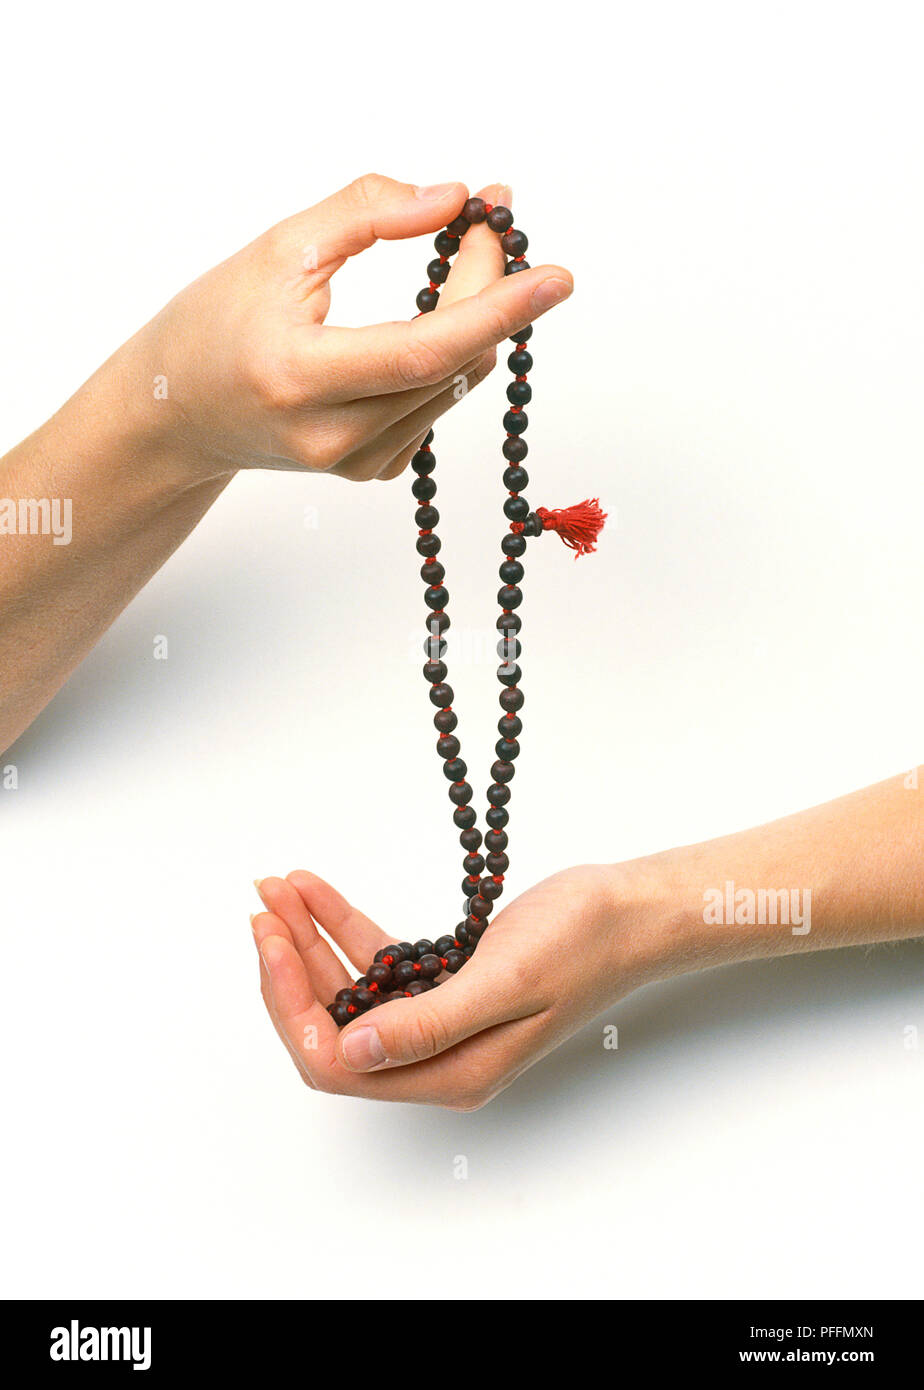 Japa Mala beads, one person holding one end and another person